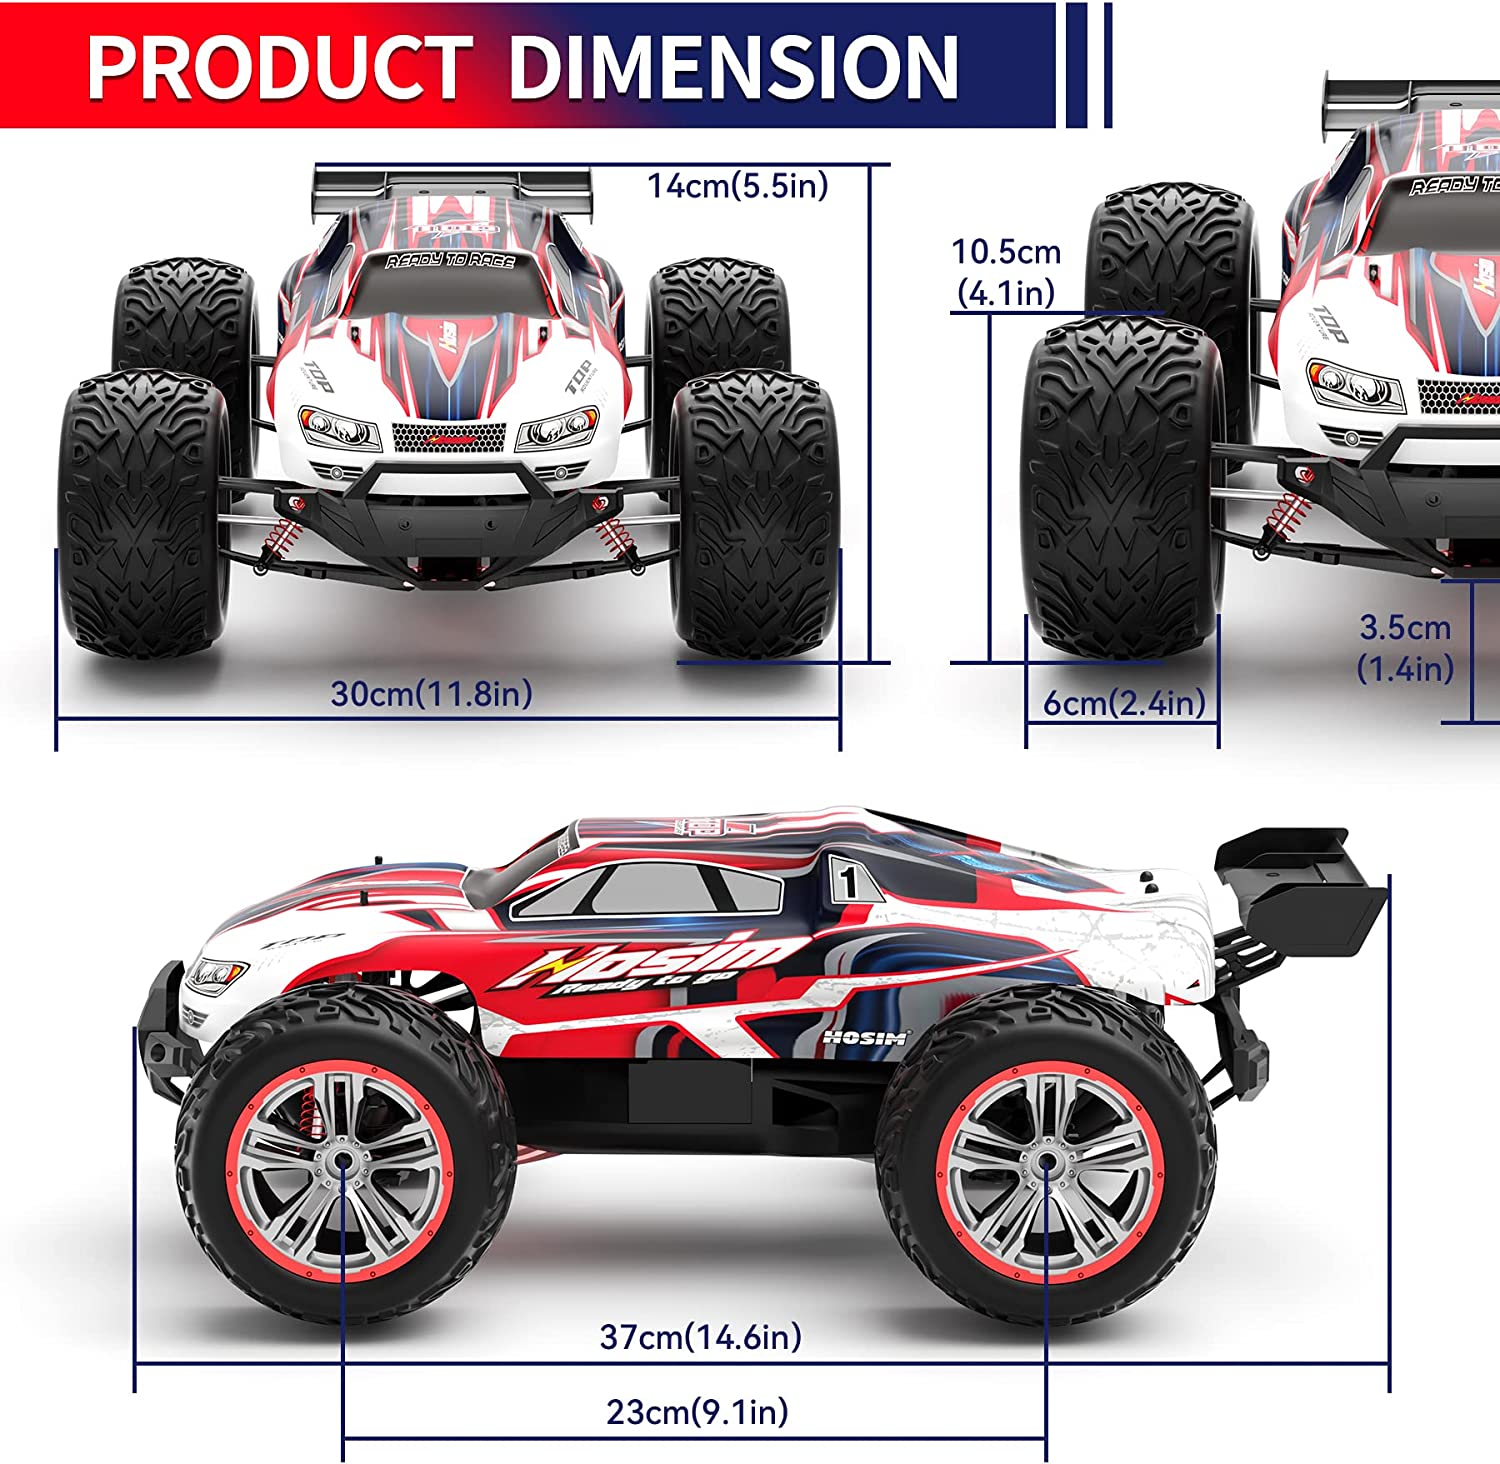 Hosim 1:10 RC Cars 48+ KMH 2.4GHz Remote Control Car 4WD Off Road Monster Truck Buggy Toy for Boys Teens Adults Gifts